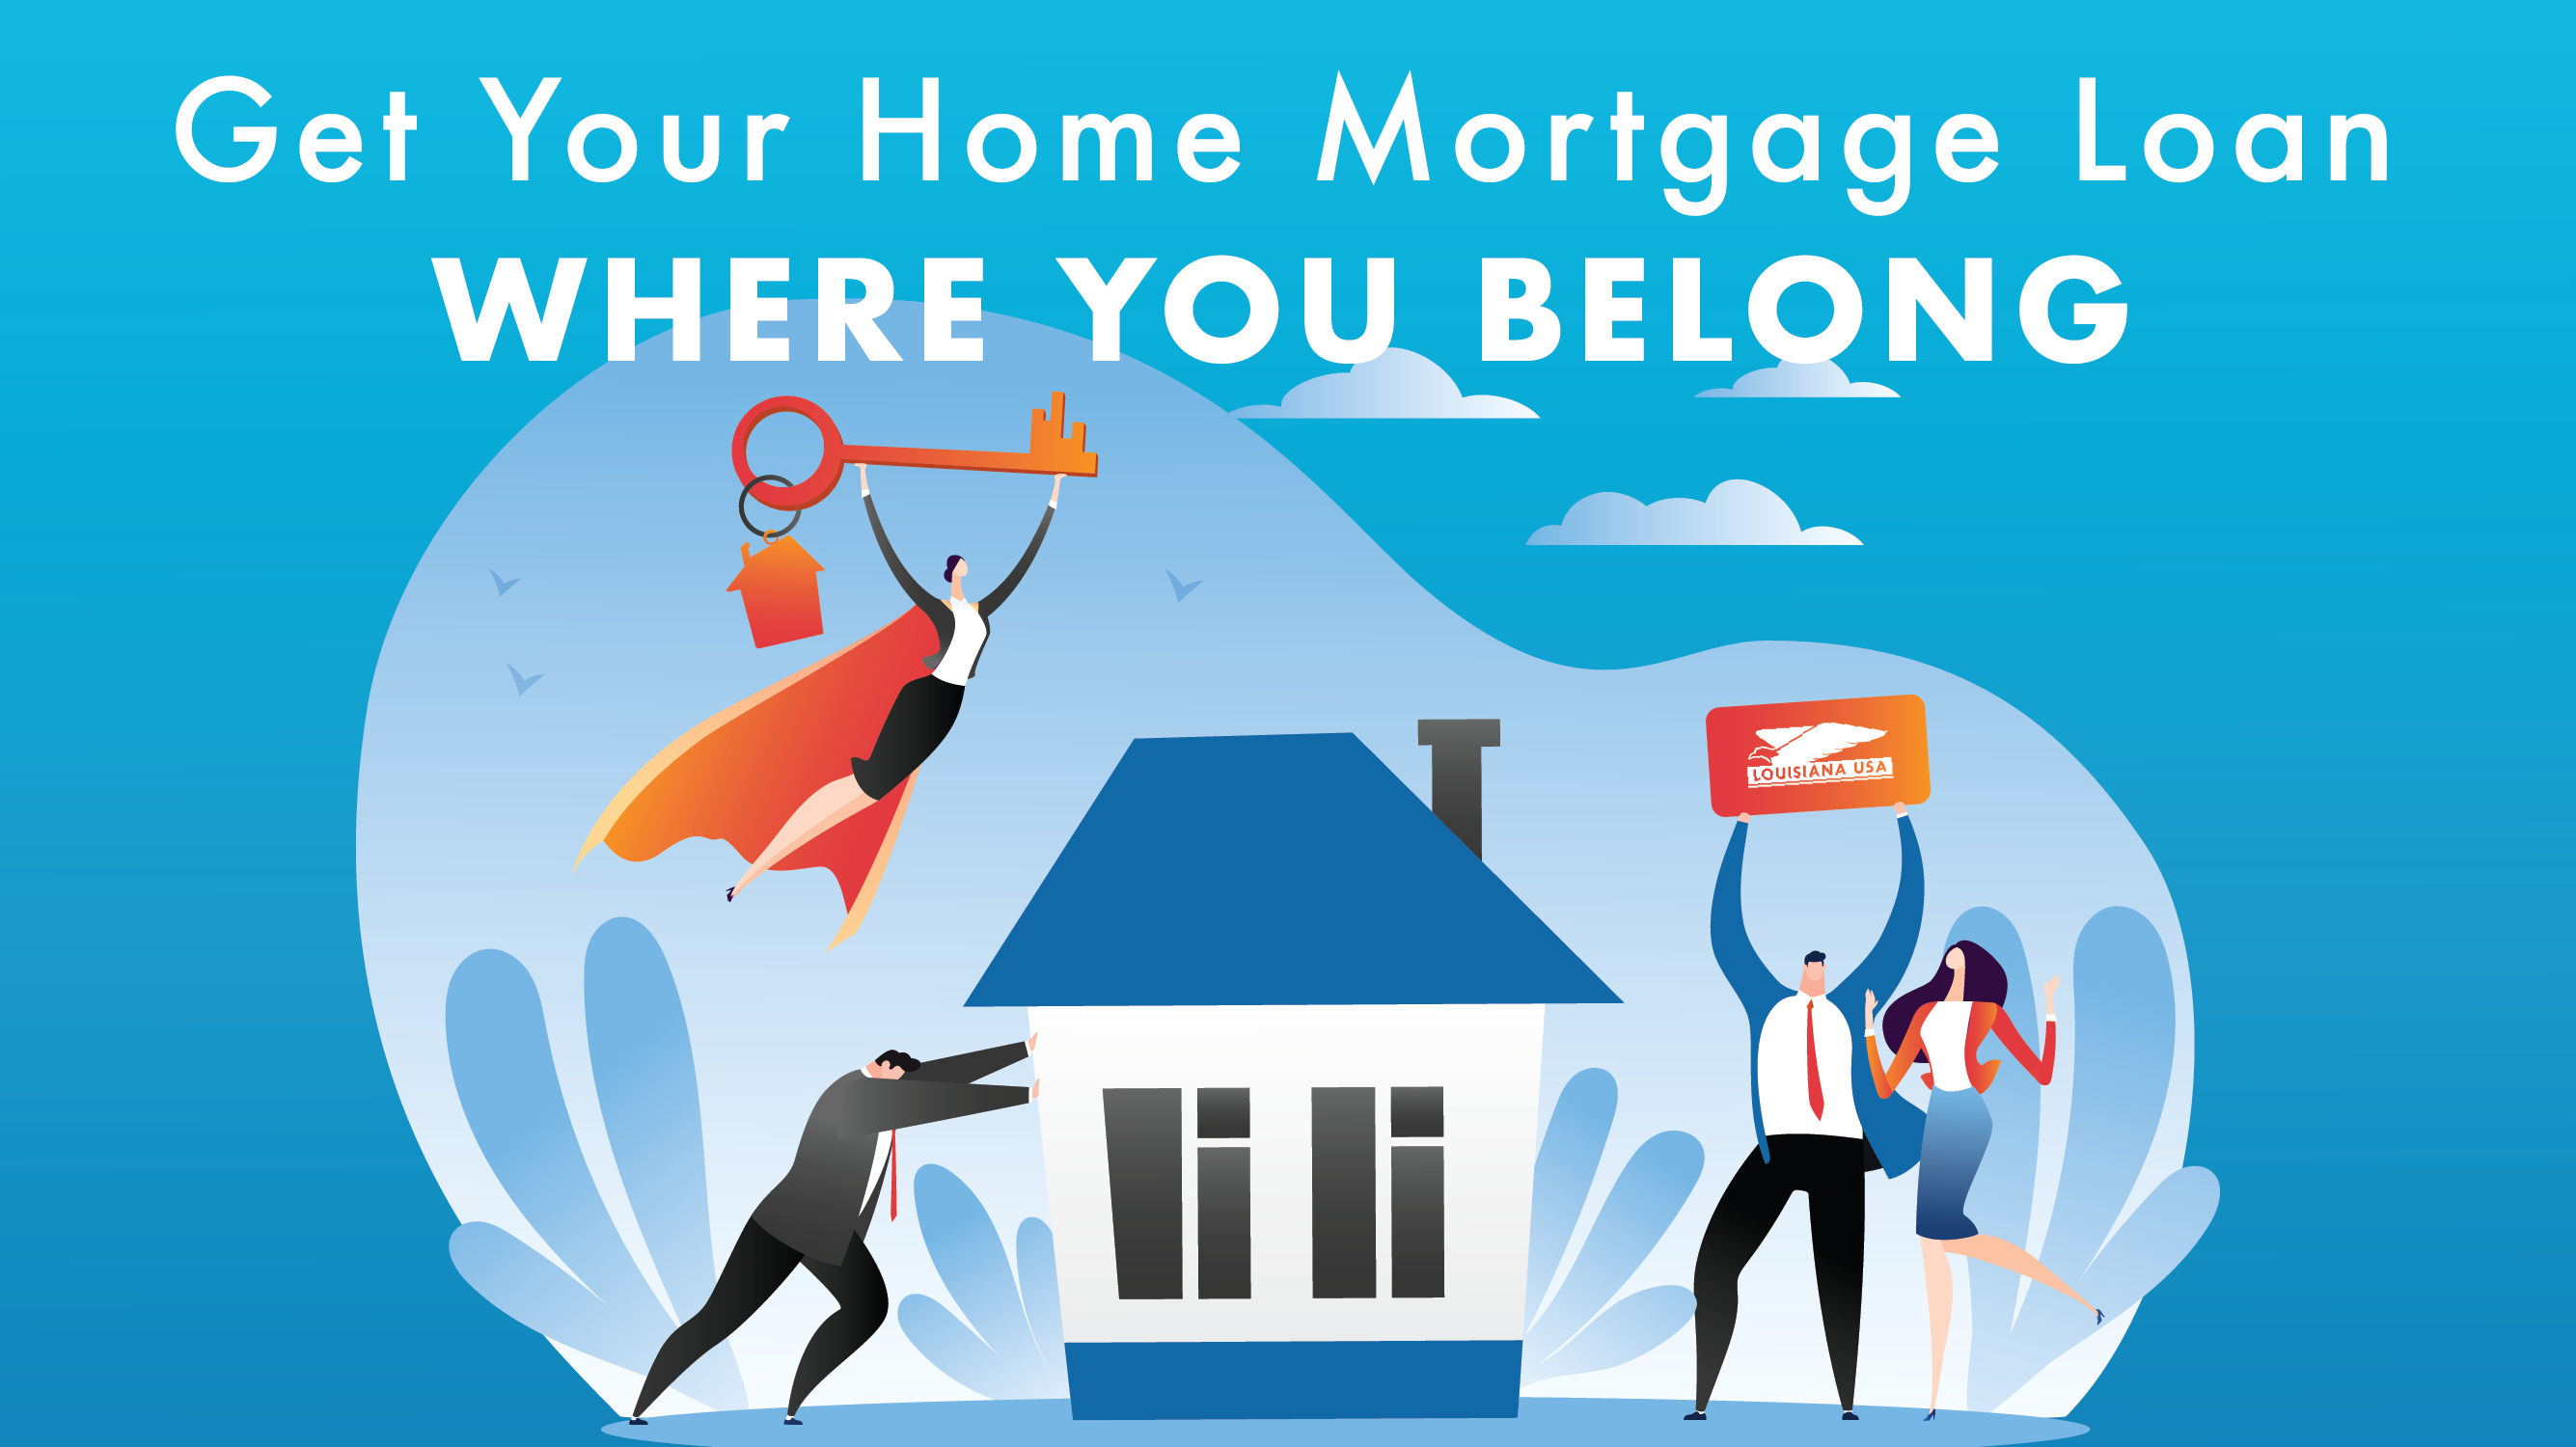 Get Your Home Mortgage Loan Where You Belong